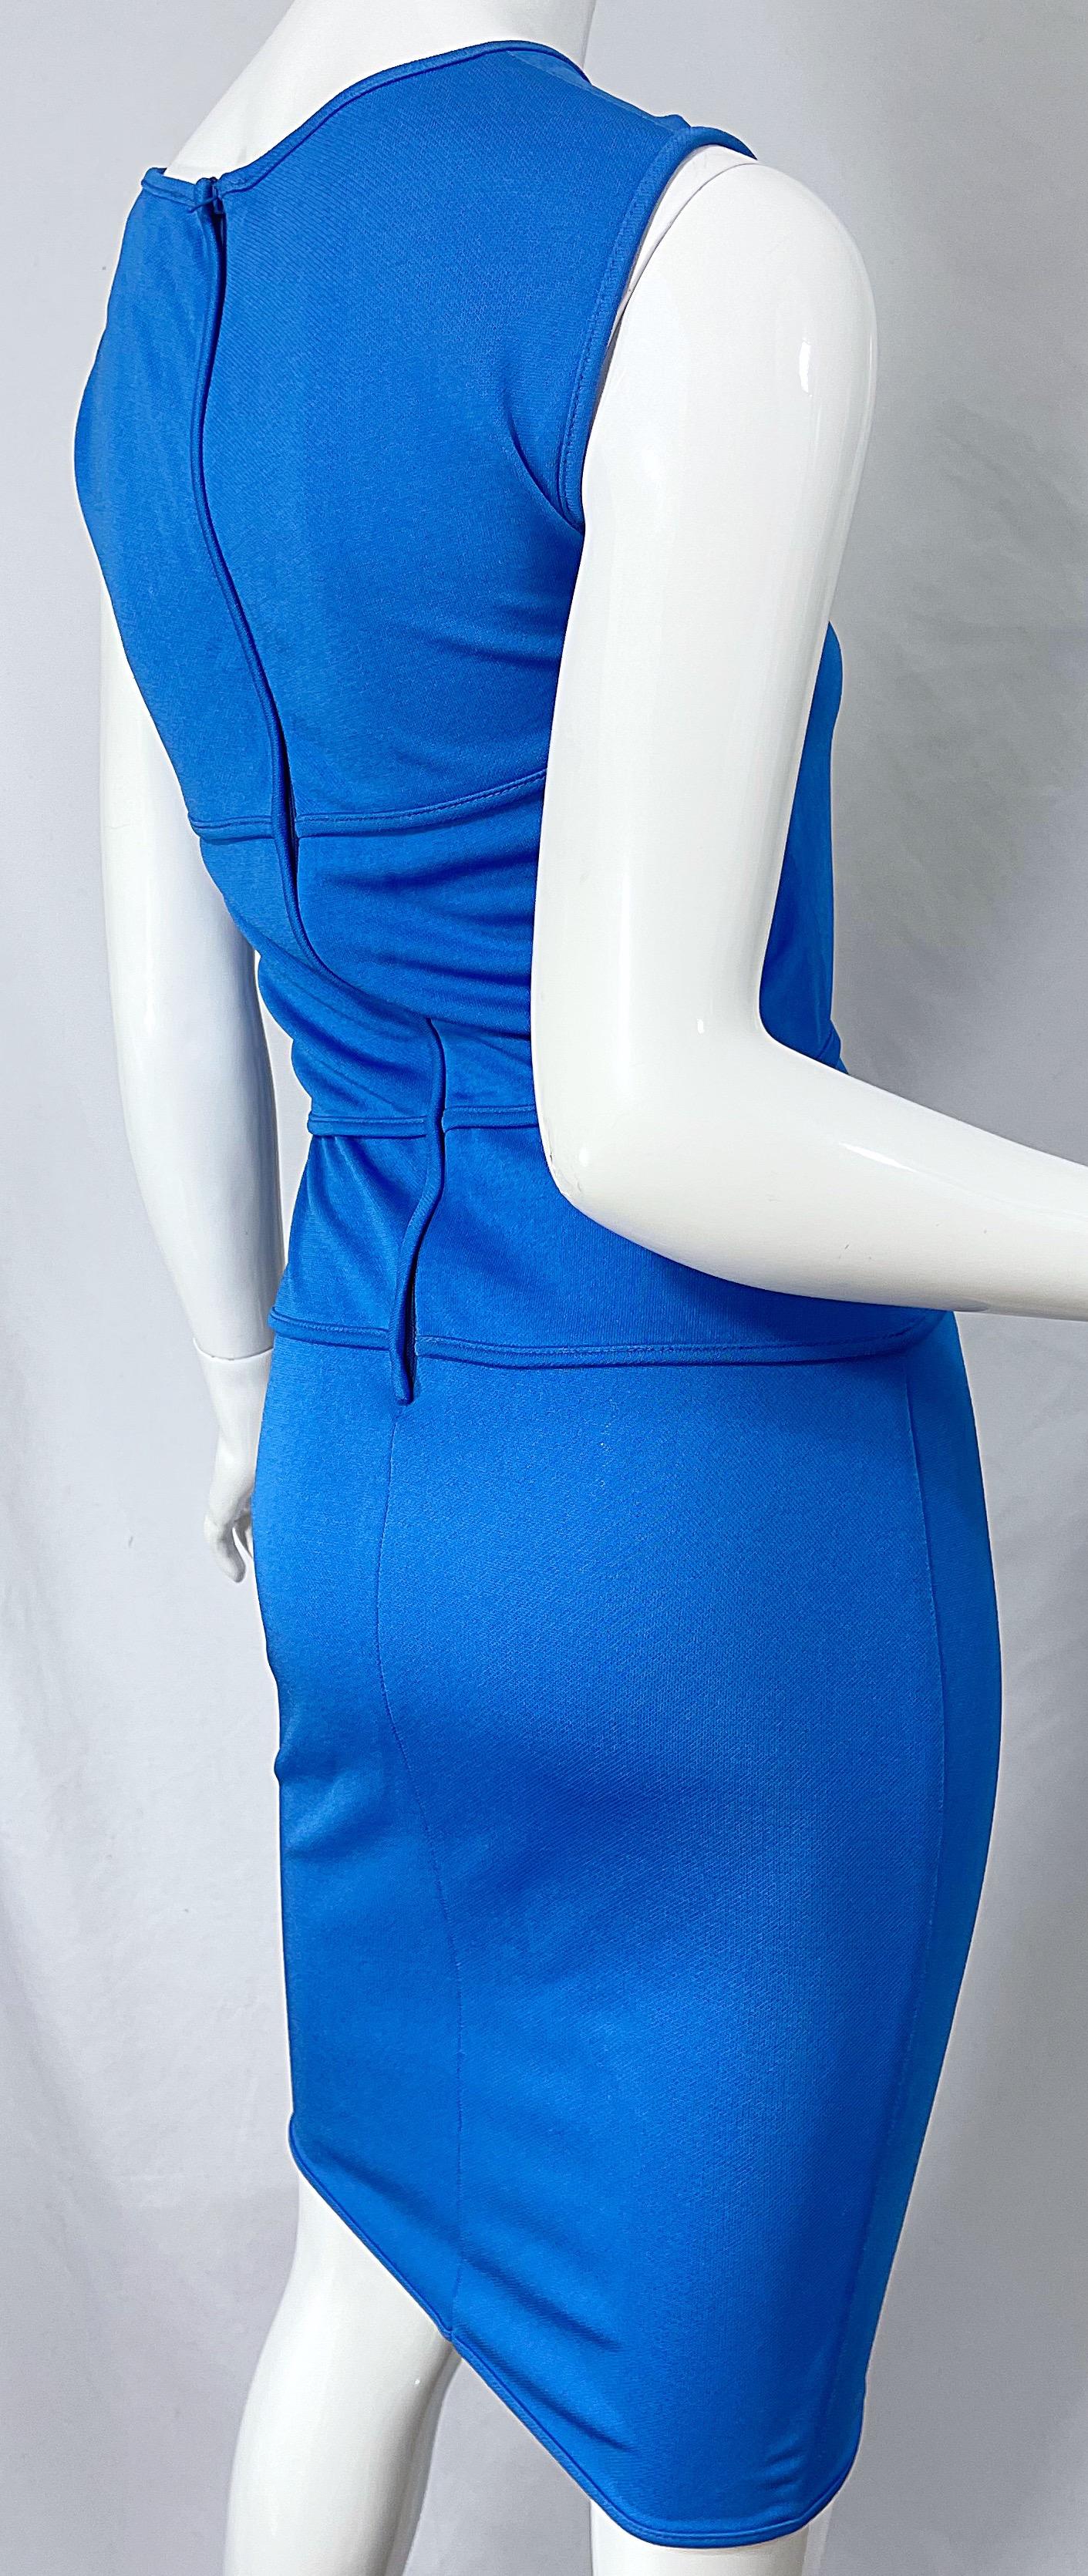 Thierry Mugler 1980s Blue Cut Out Vintage Body Con 80s Dress Size 44 For Sale 2